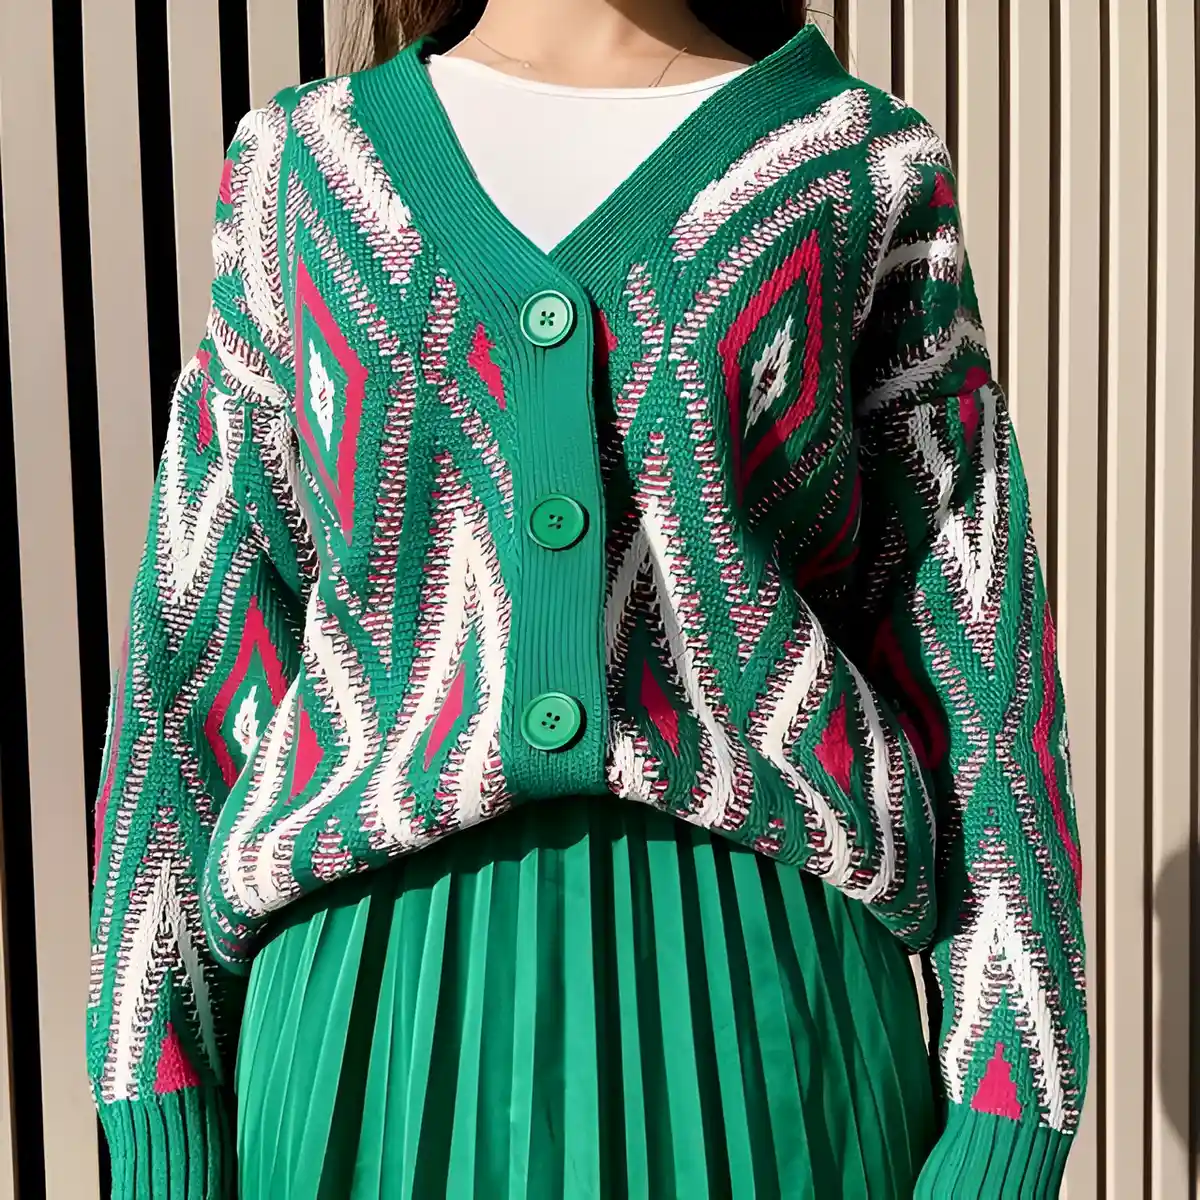 green pleated skirt paired with patterned oversized cardigan in same color